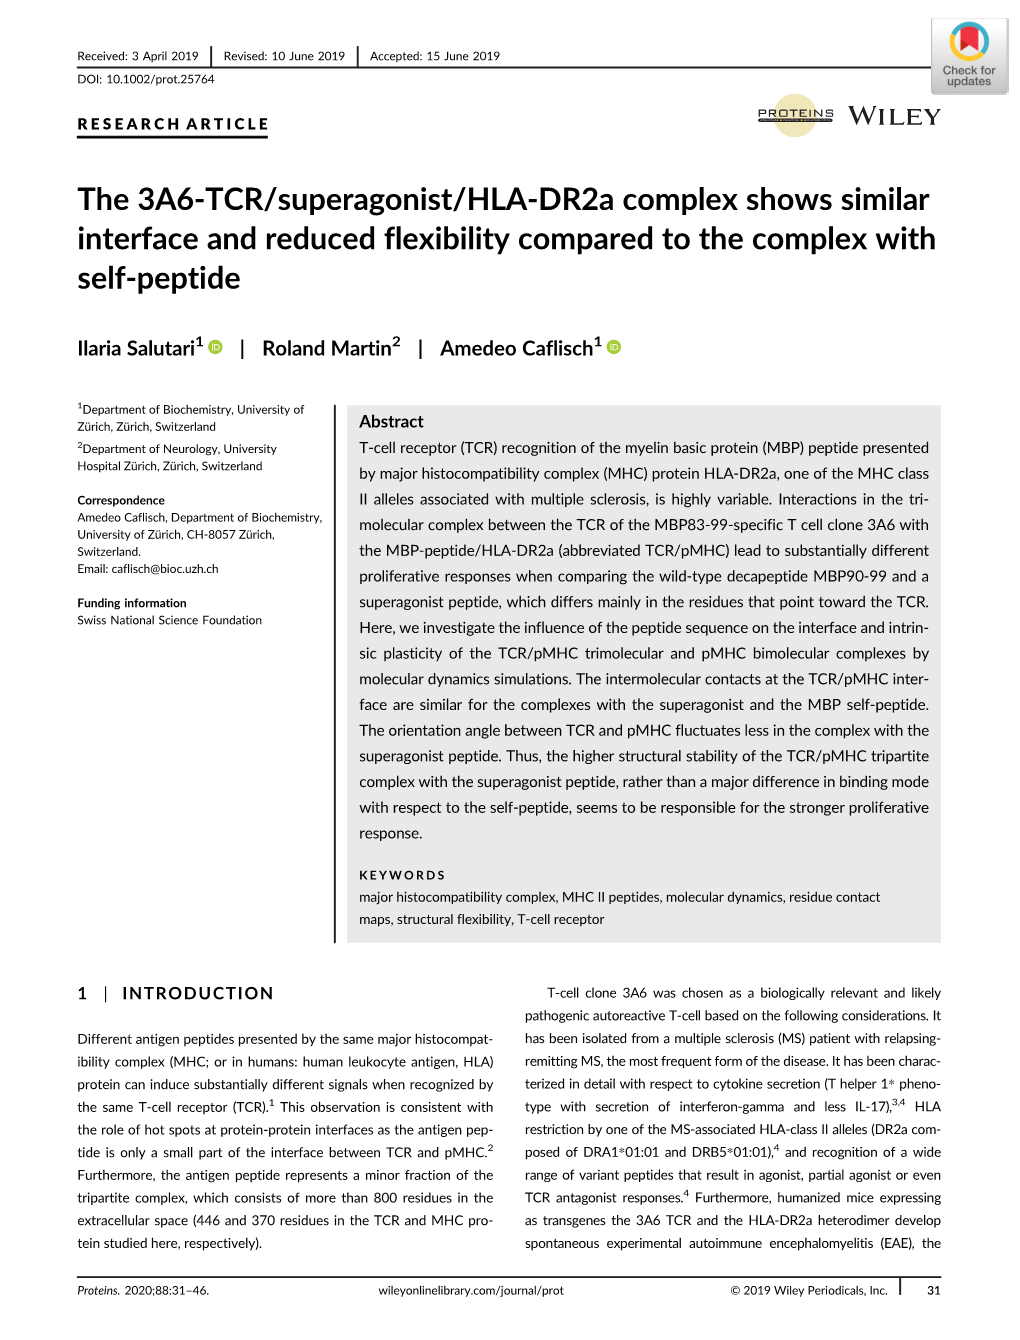 The 3A6‐TCR/Superagonist/HLA‐Dr2a Complex Shows Similar